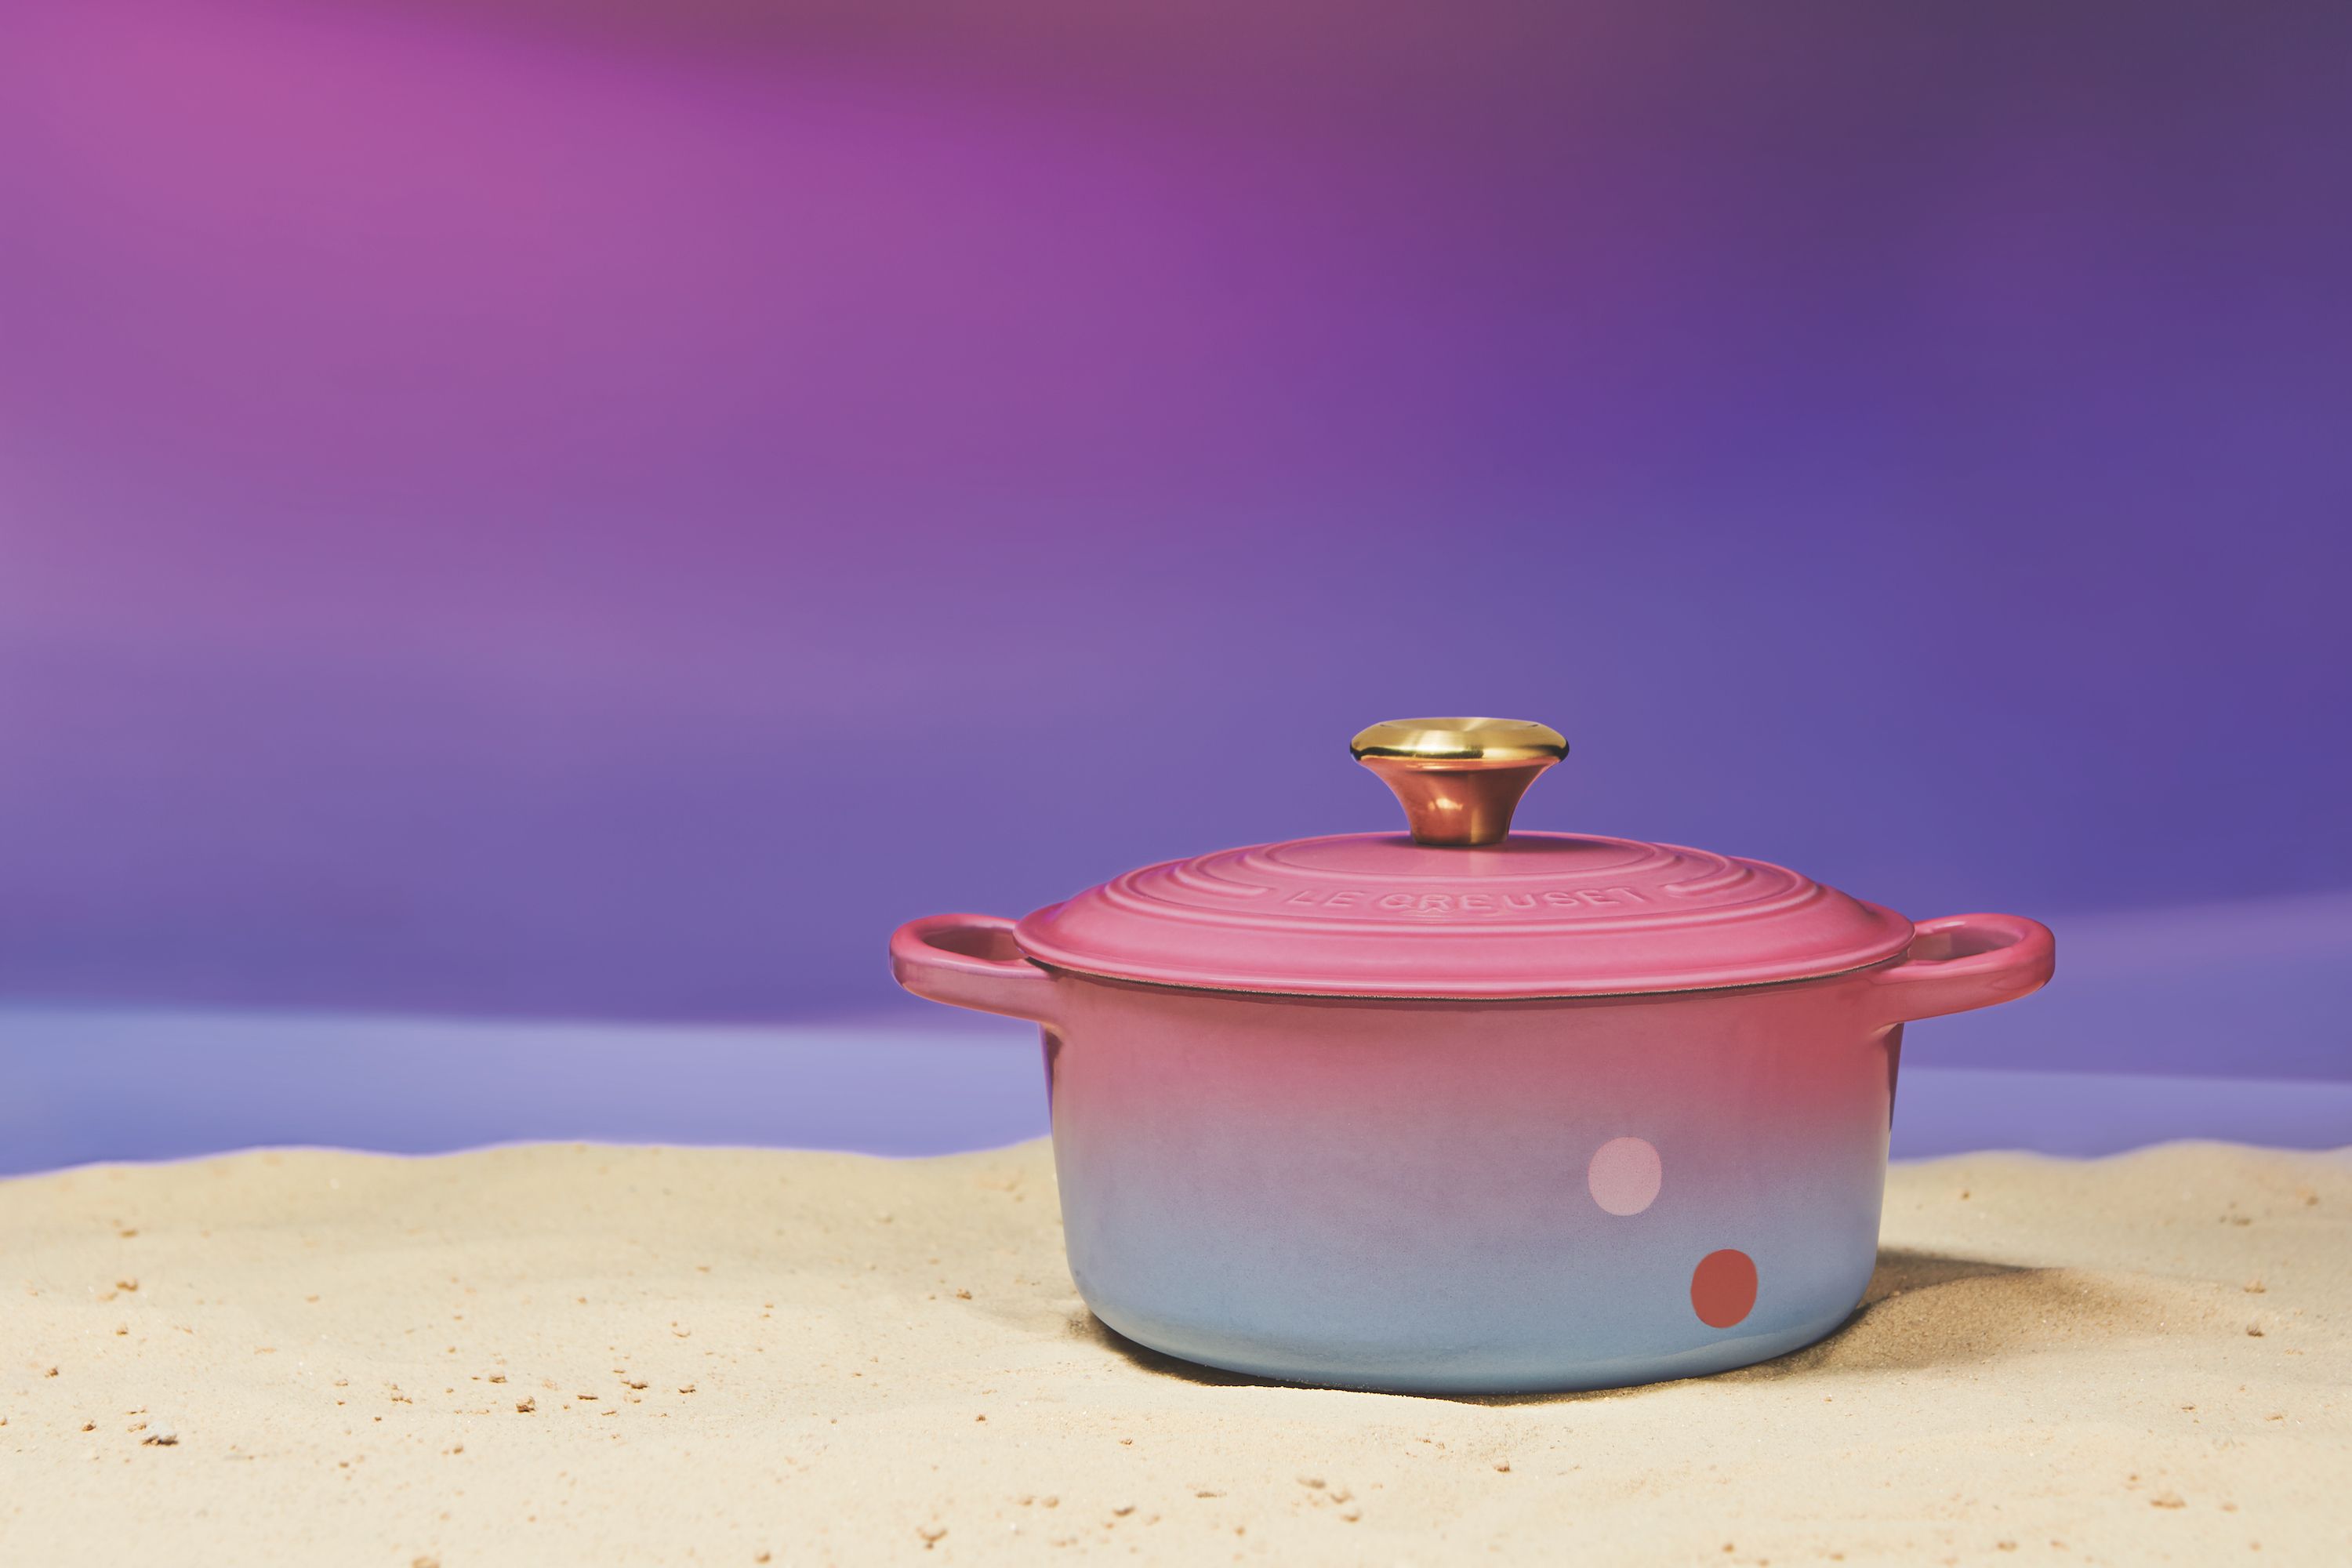 A Star x Le Creuset Kitchenware Is Now In Stores